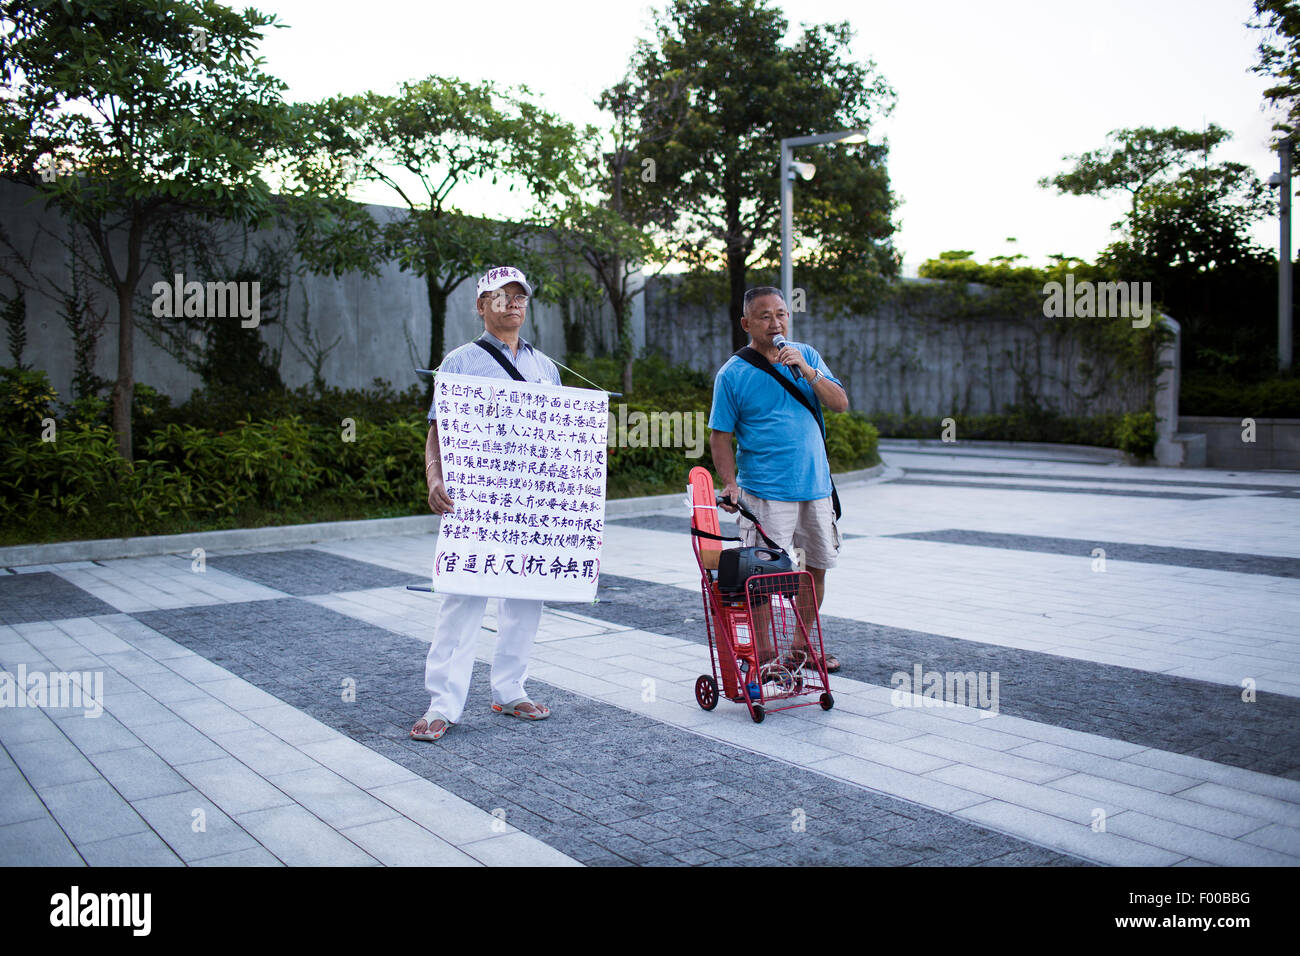 Two protesters speaking out against the government in LEGCO, Hong Kong during the Umbrella Revolution period. Stock Photo